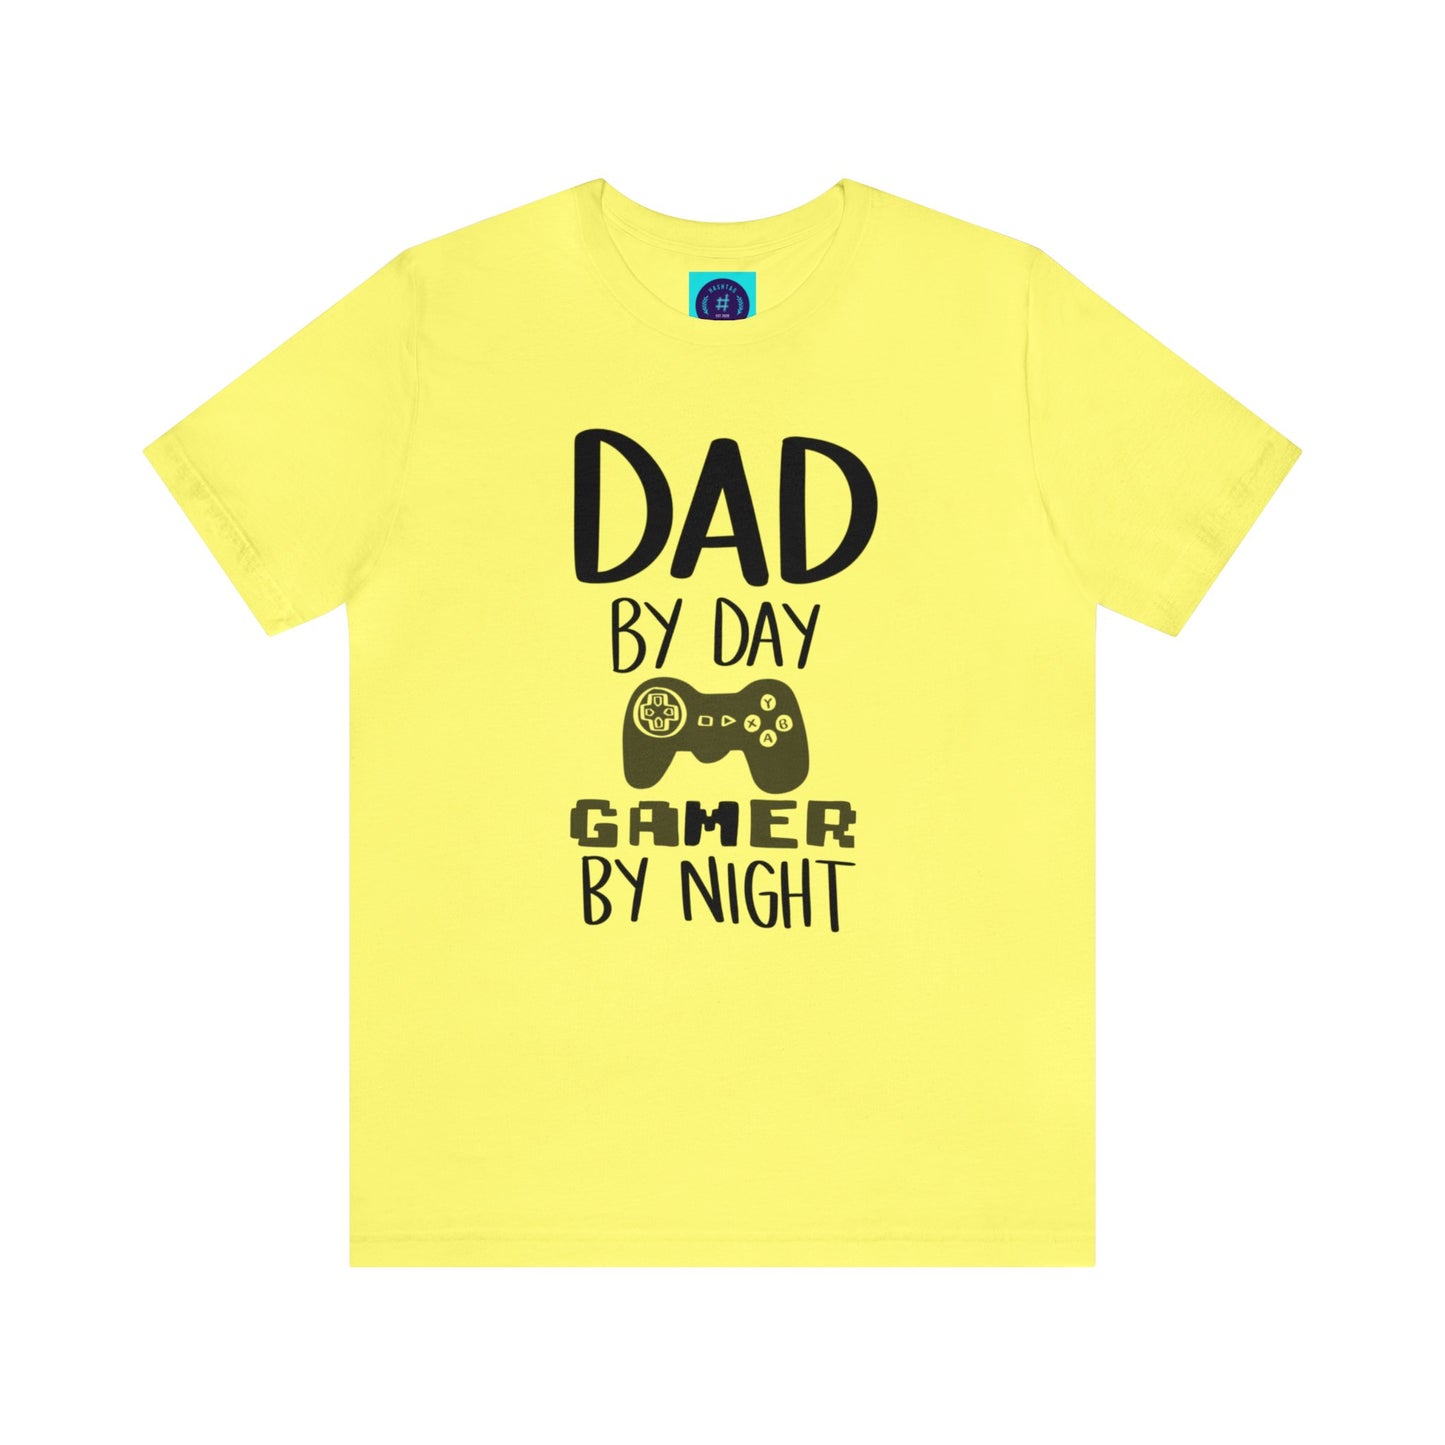 Dad By Day Gamer By Night - Father's Day T-Shirt